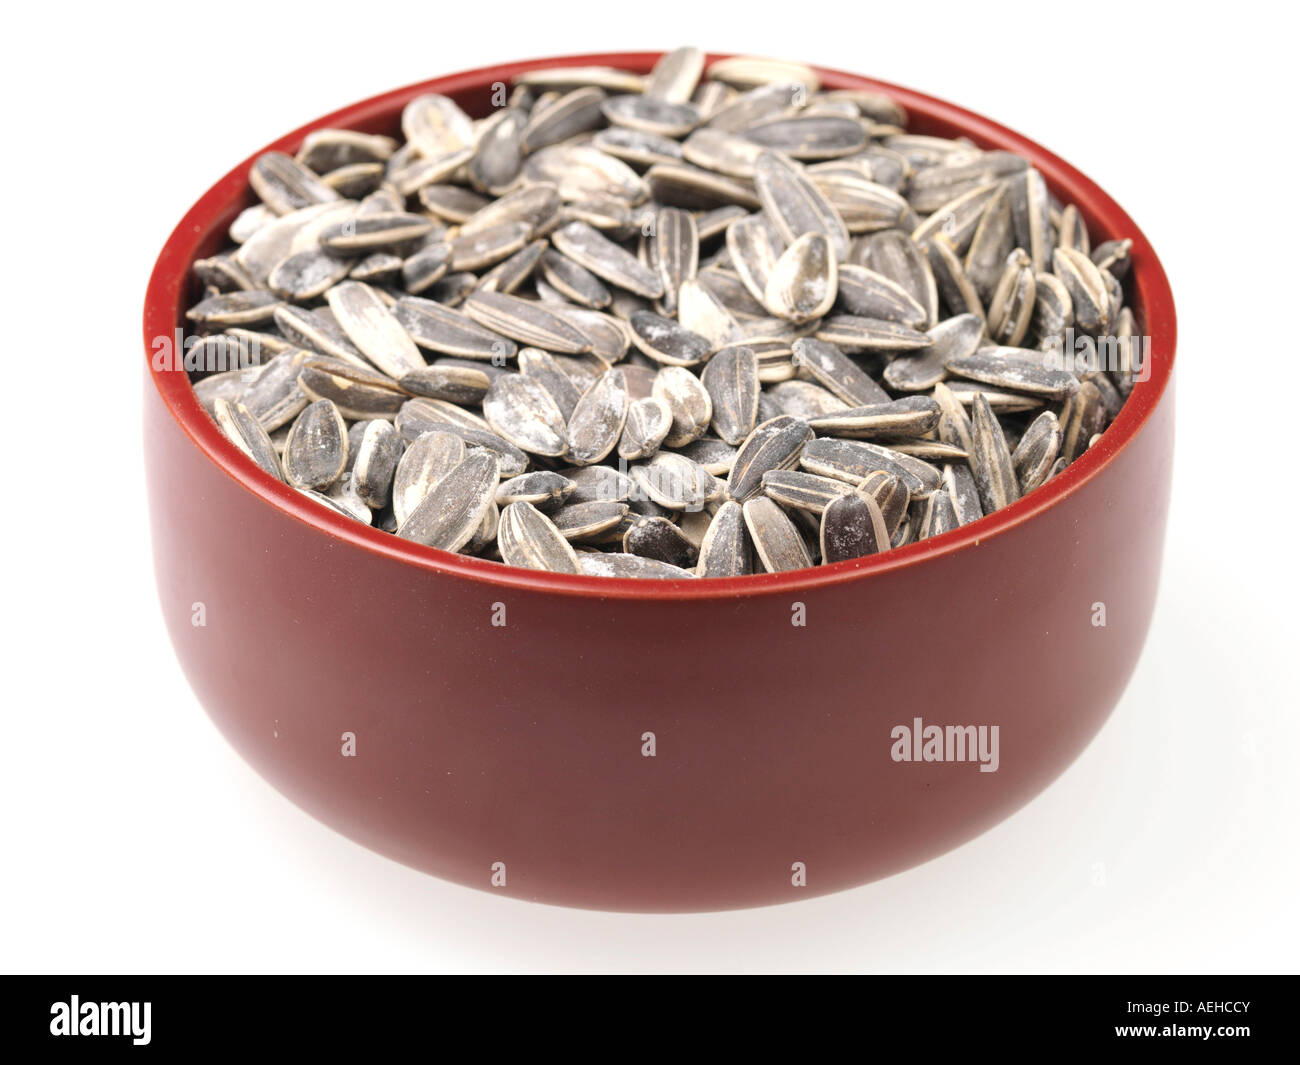 Dried Healthy Edible Sunflower Seeds Isolated Against A White Background With A Clipping Path And No People Stock Photo